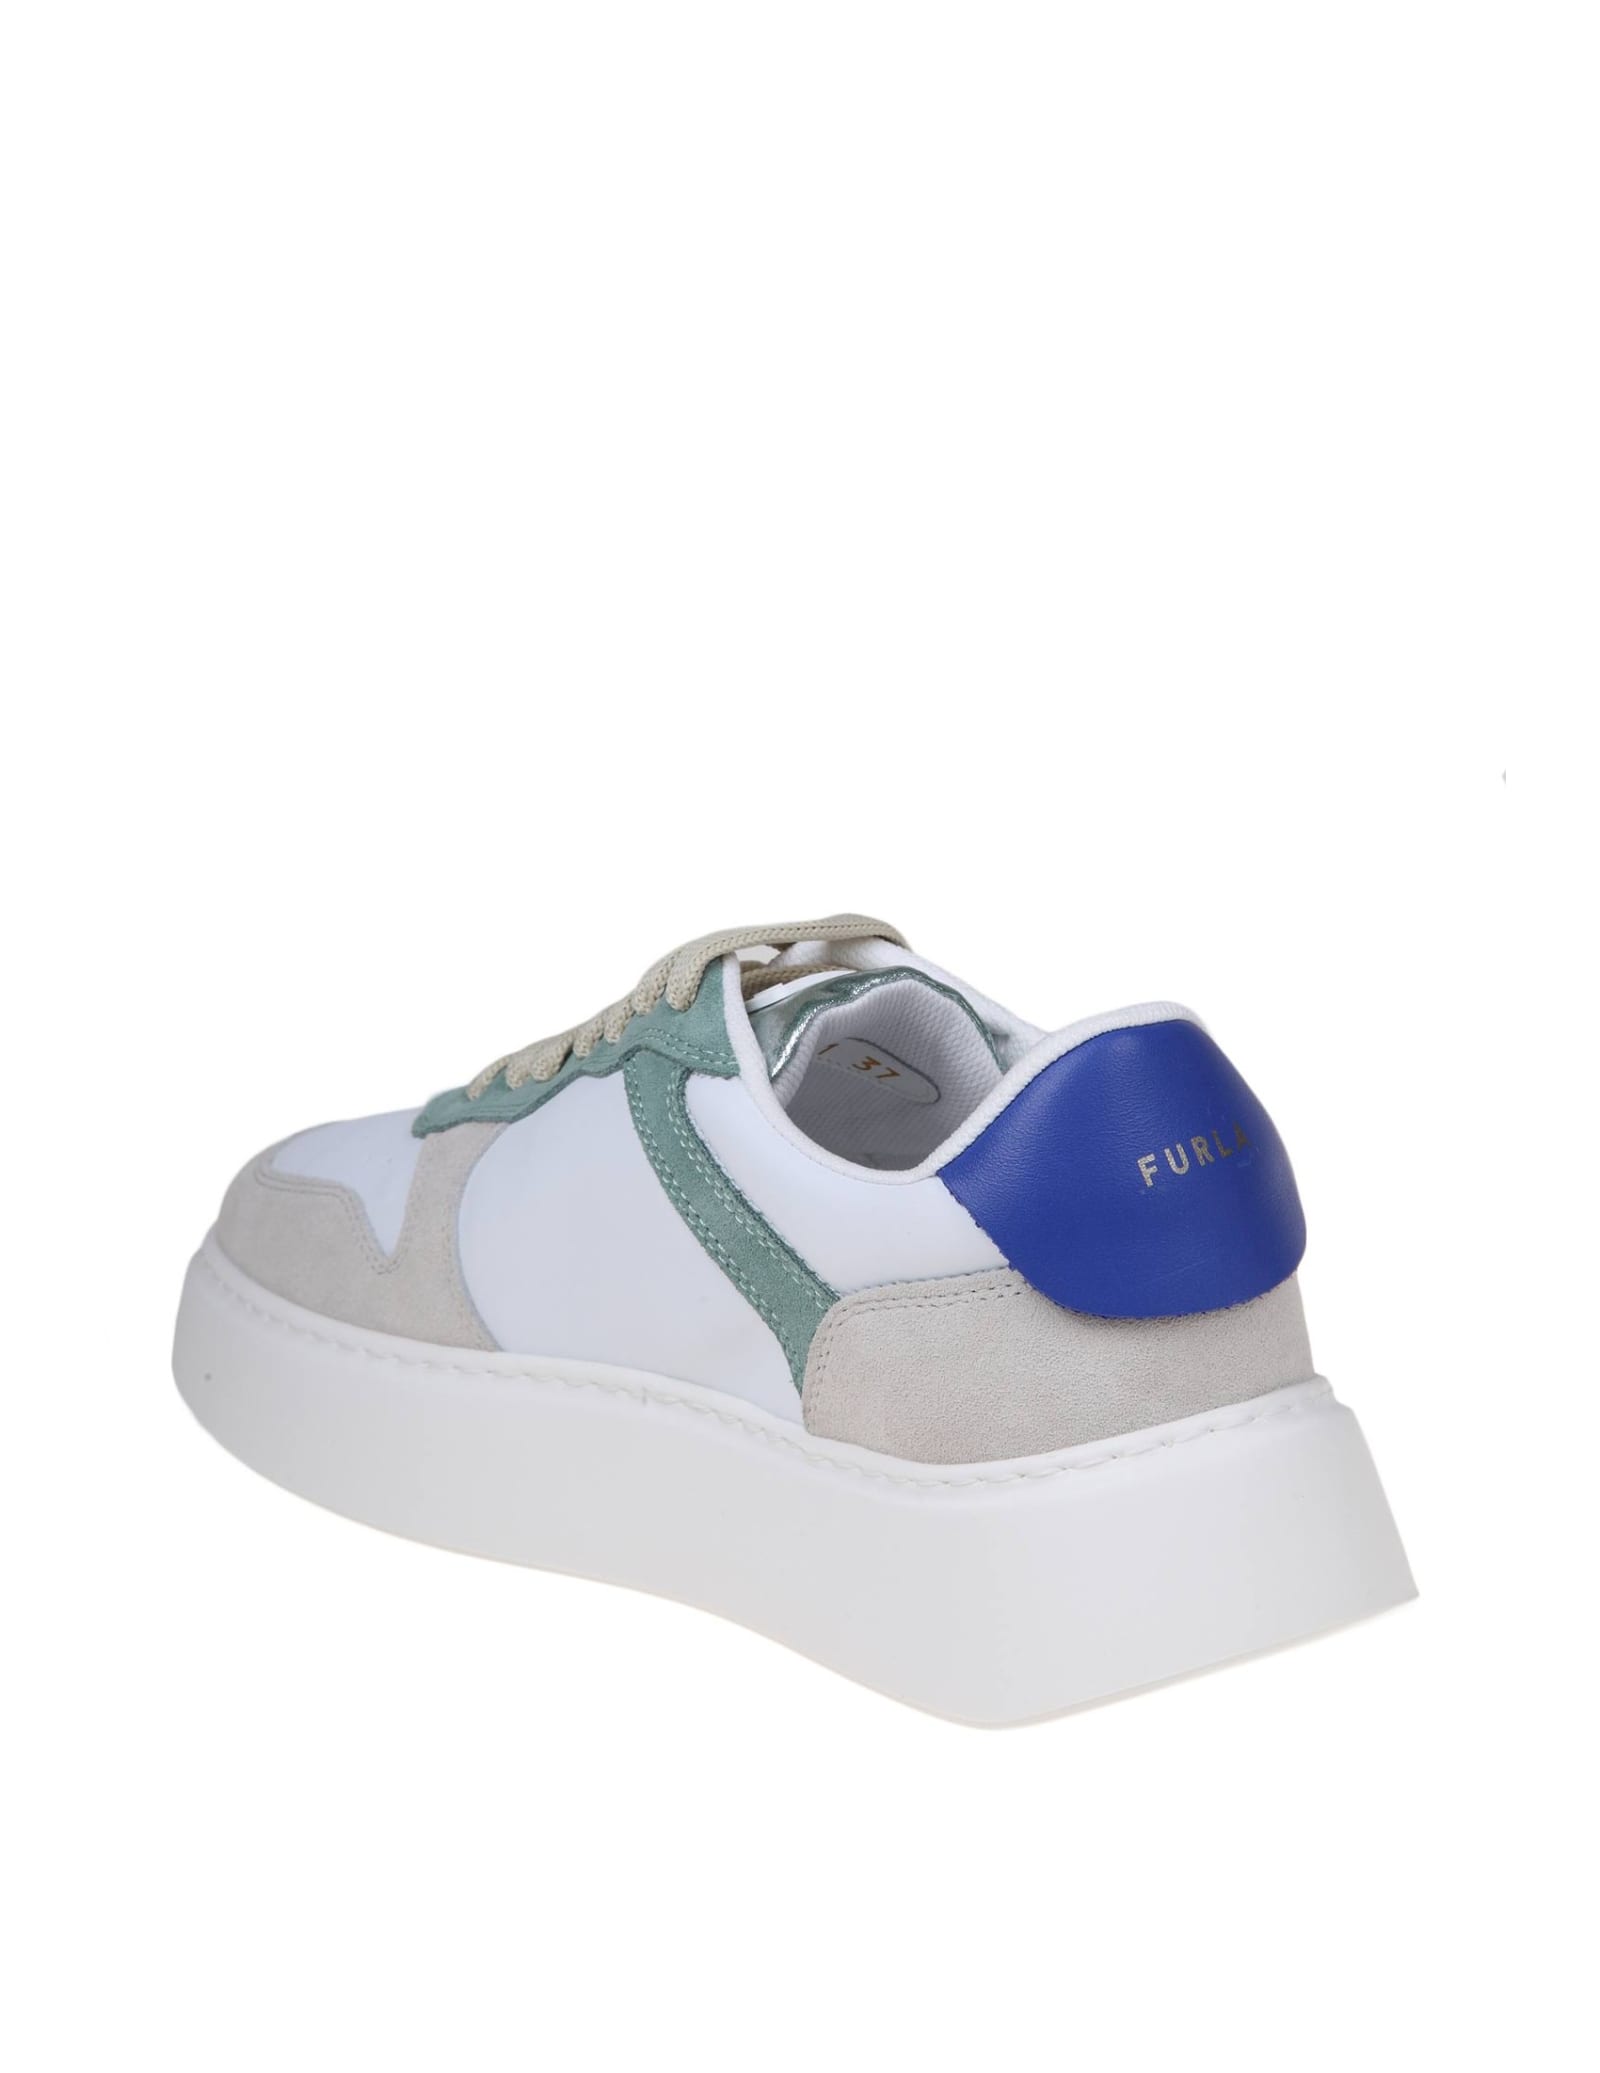 Shop Furla Sneaker Basic Model In Multicolored Synthetic Leather